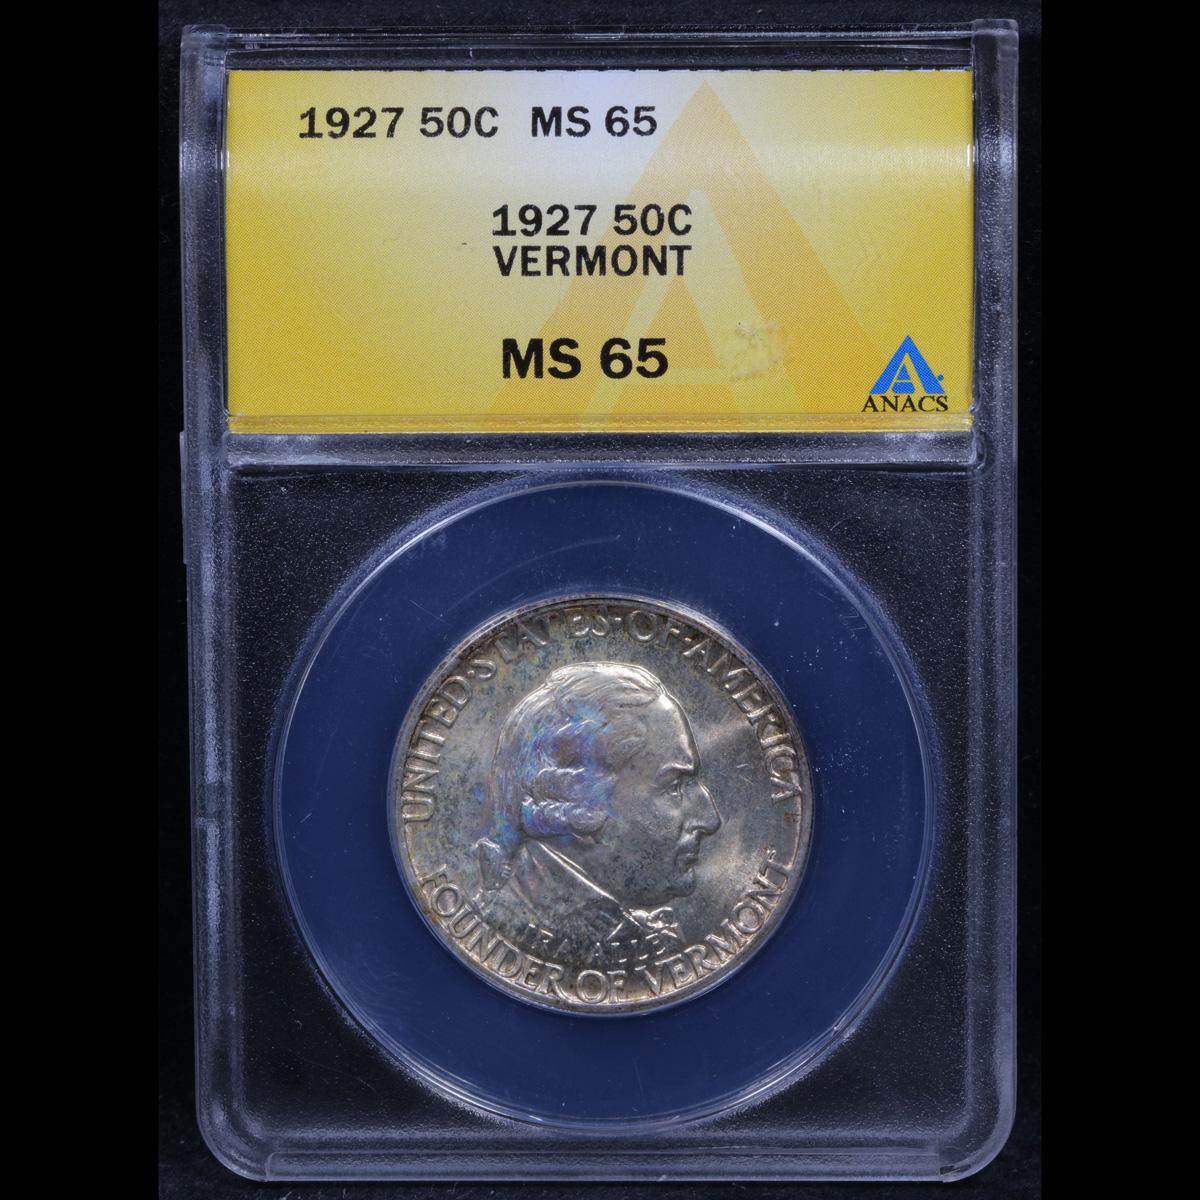 ***Auction Highlight*** ANACS 1927 Vermont Old Commem Half Dollar 50c Graded ms65 By ANACS (fc)